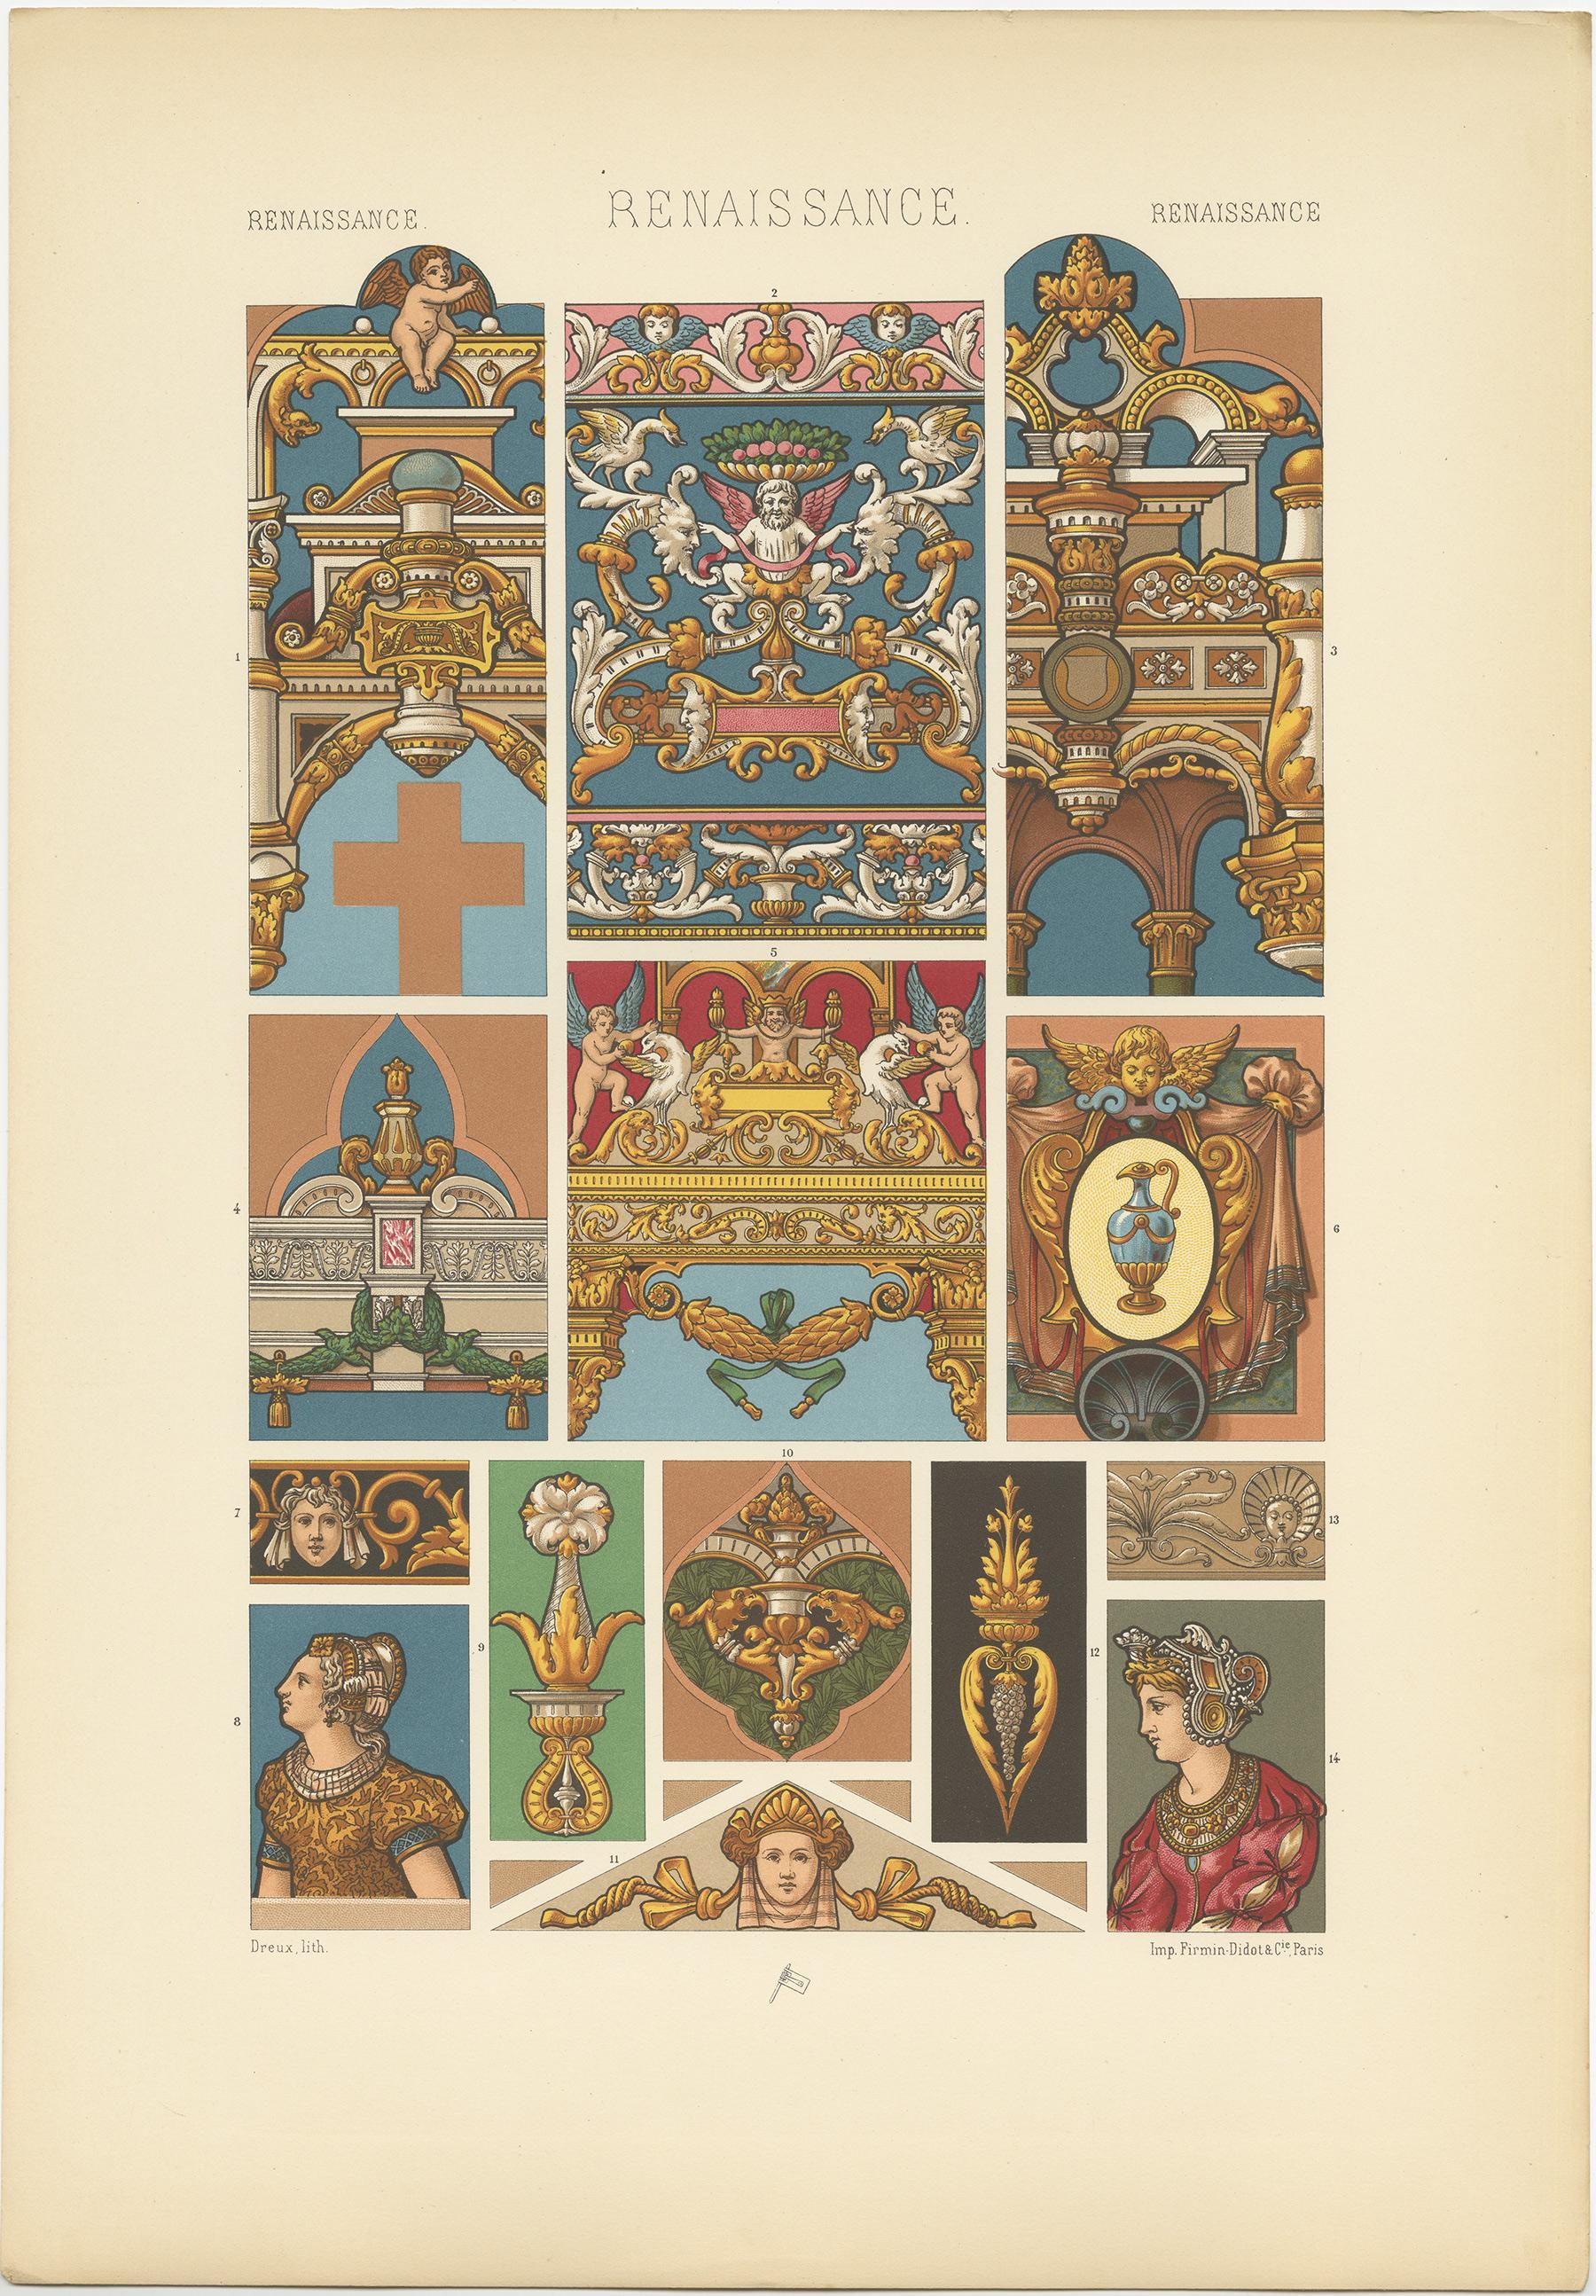 Antique print titled 'Renaissance - Renaissance - Renaissance'. Chromolithograph of sculptural and pictorial motifs from stained glass, France 16th century ornaments. This print originates from 'l'Ornement Polychrome' by Auguste Racinet. Published